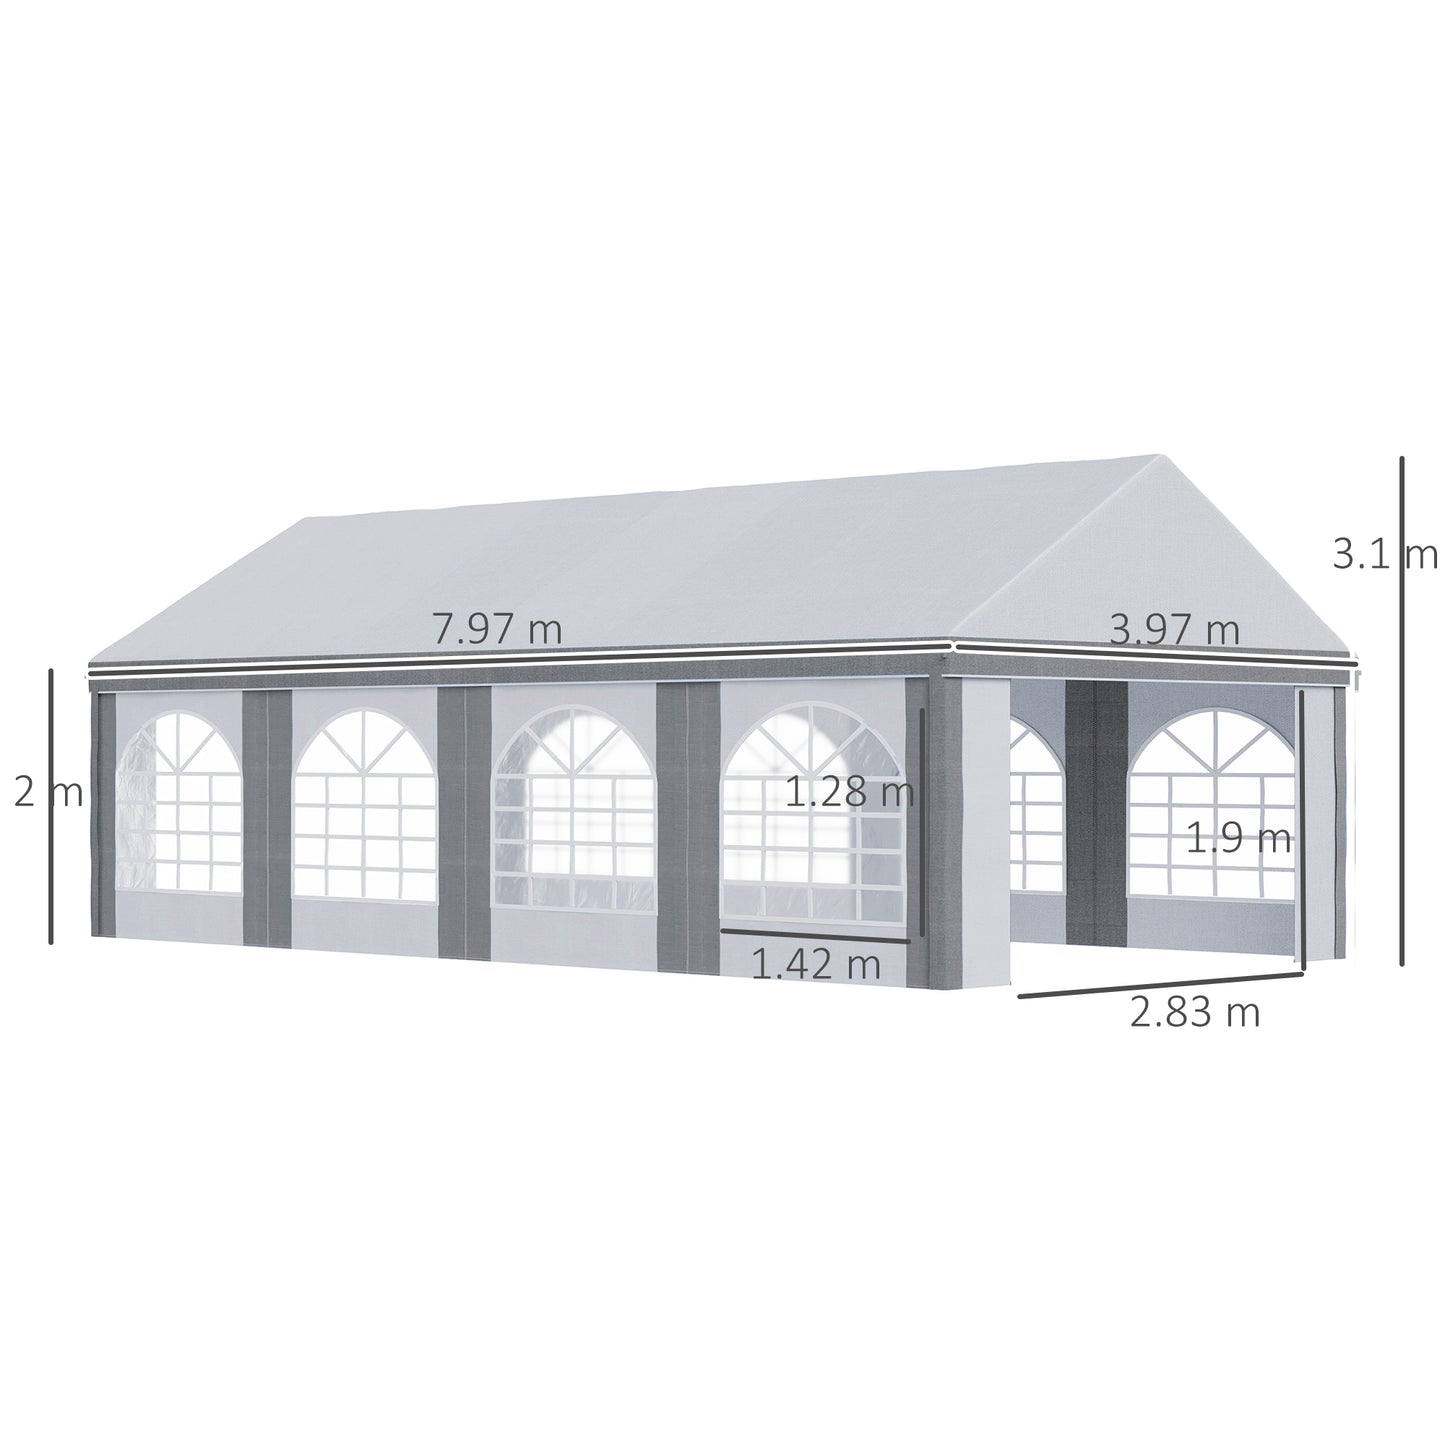 Outsunny 8 x 4m Galvanised Party Tent, Marquee Gazebo with Sides, Eight Windows and Double Doors, for Parties, Wedding and Events